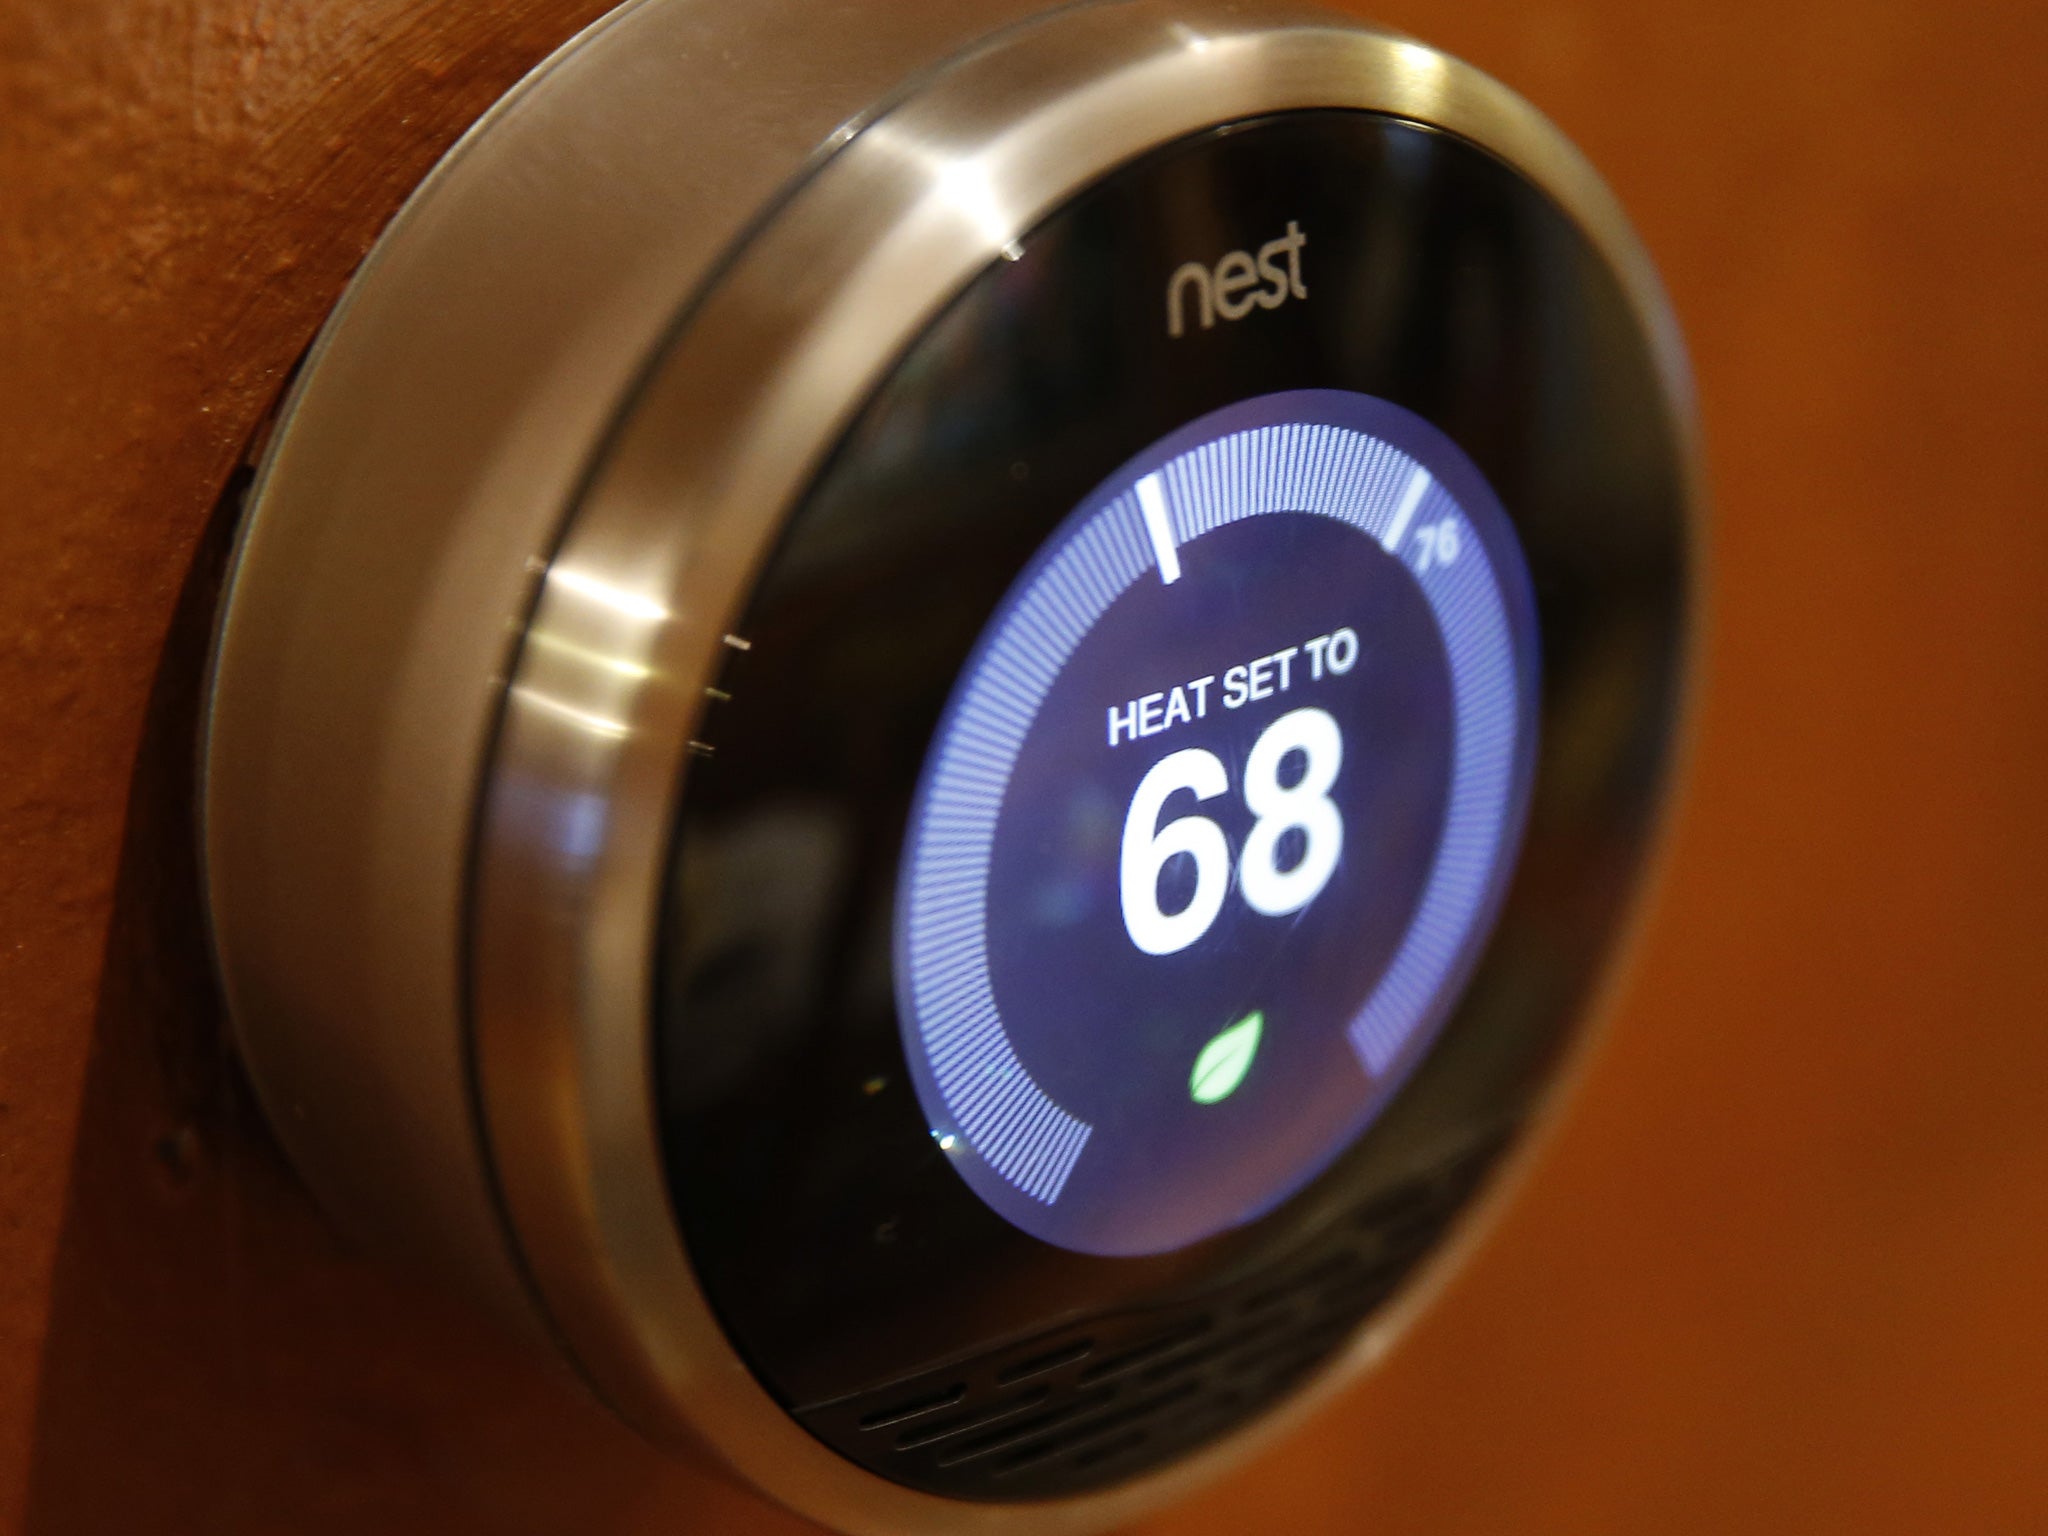 Both of Nest's current products use motion sensors, but can only monitor when somebody walks past the device itself.